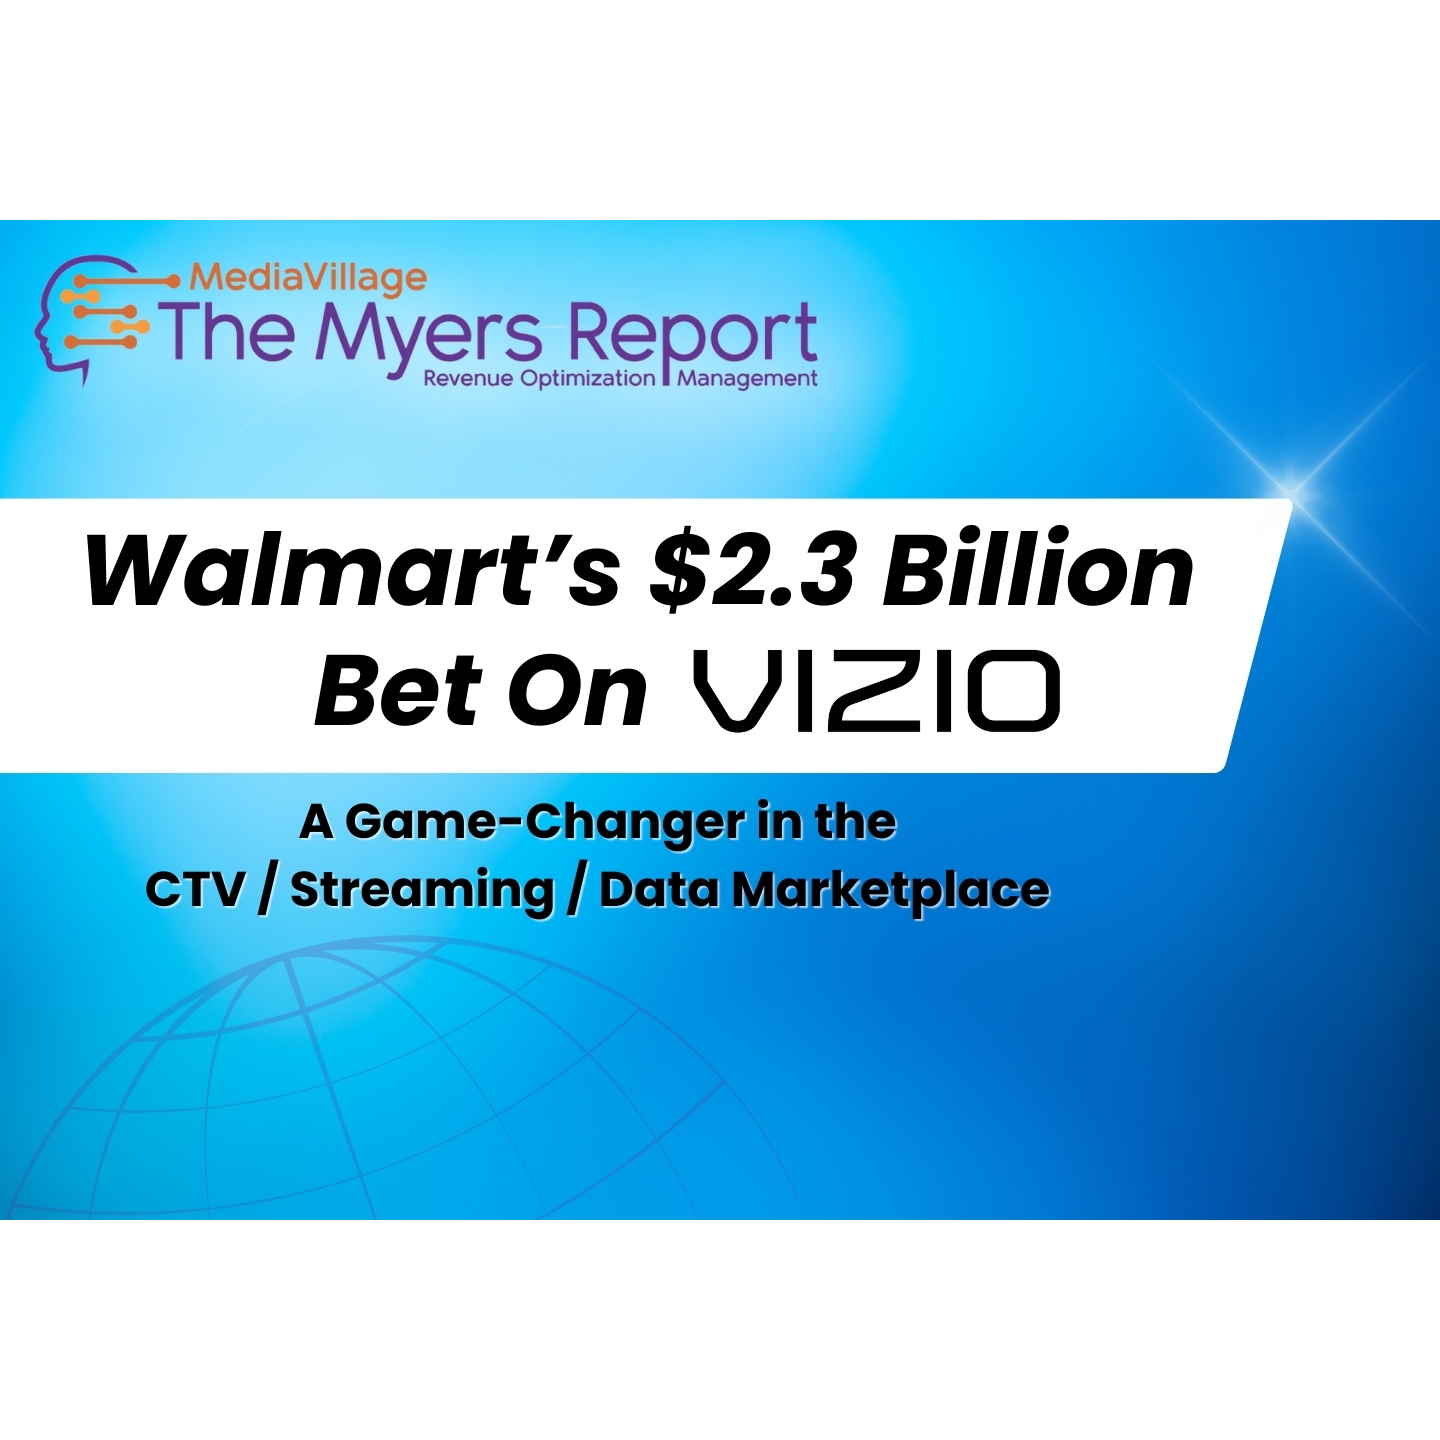 Cover image for  article: Walmart's $2.3 Billion Bet on Vizio: A Game-Changer in the CTV/Streaming/Data Marketplace